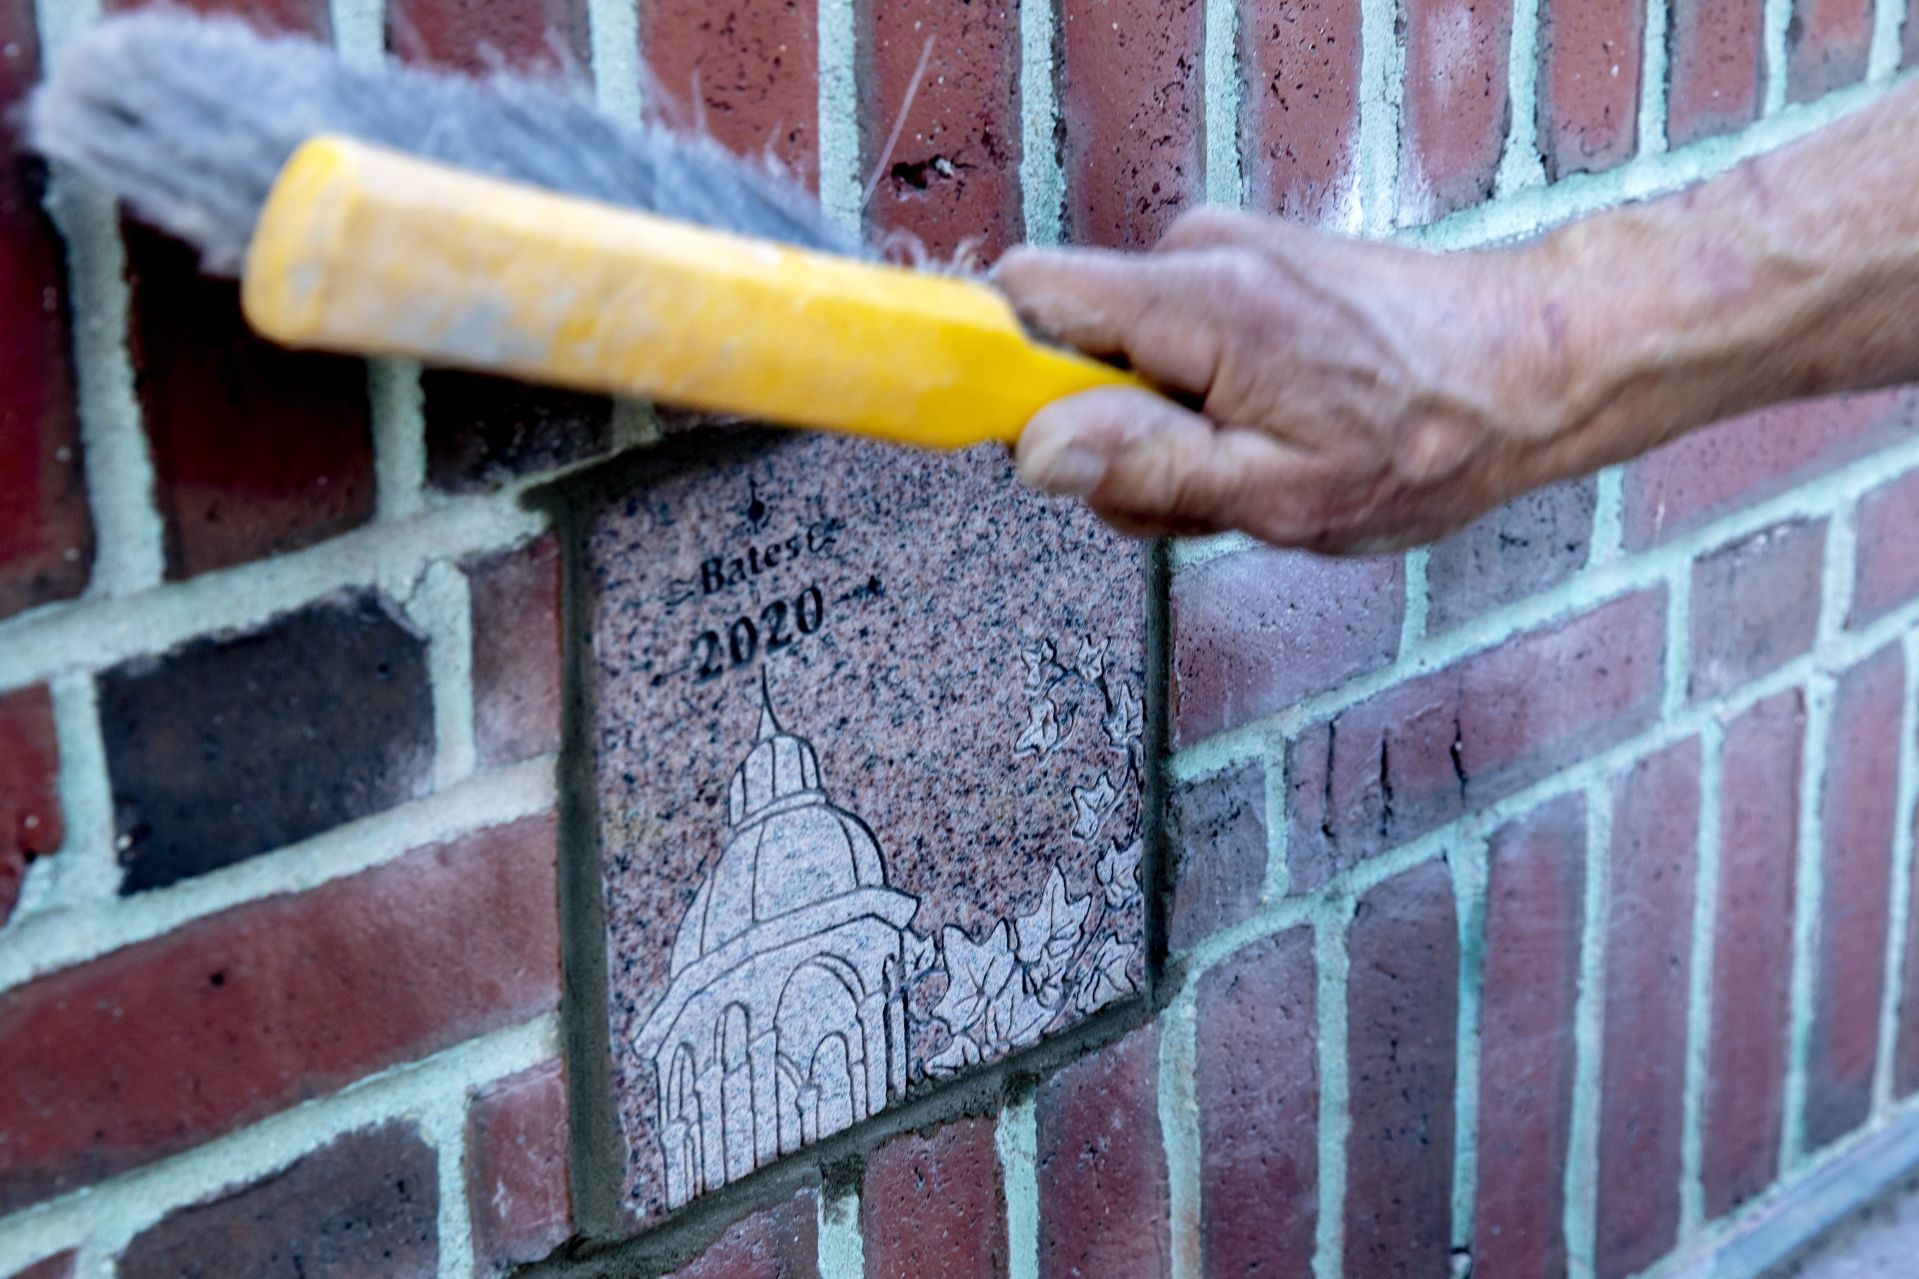 Ron Tardif, mason for facility services, installs the Class of 2020 ivy stone on the front of Pettentill Hall, to the right of the building's entrance.